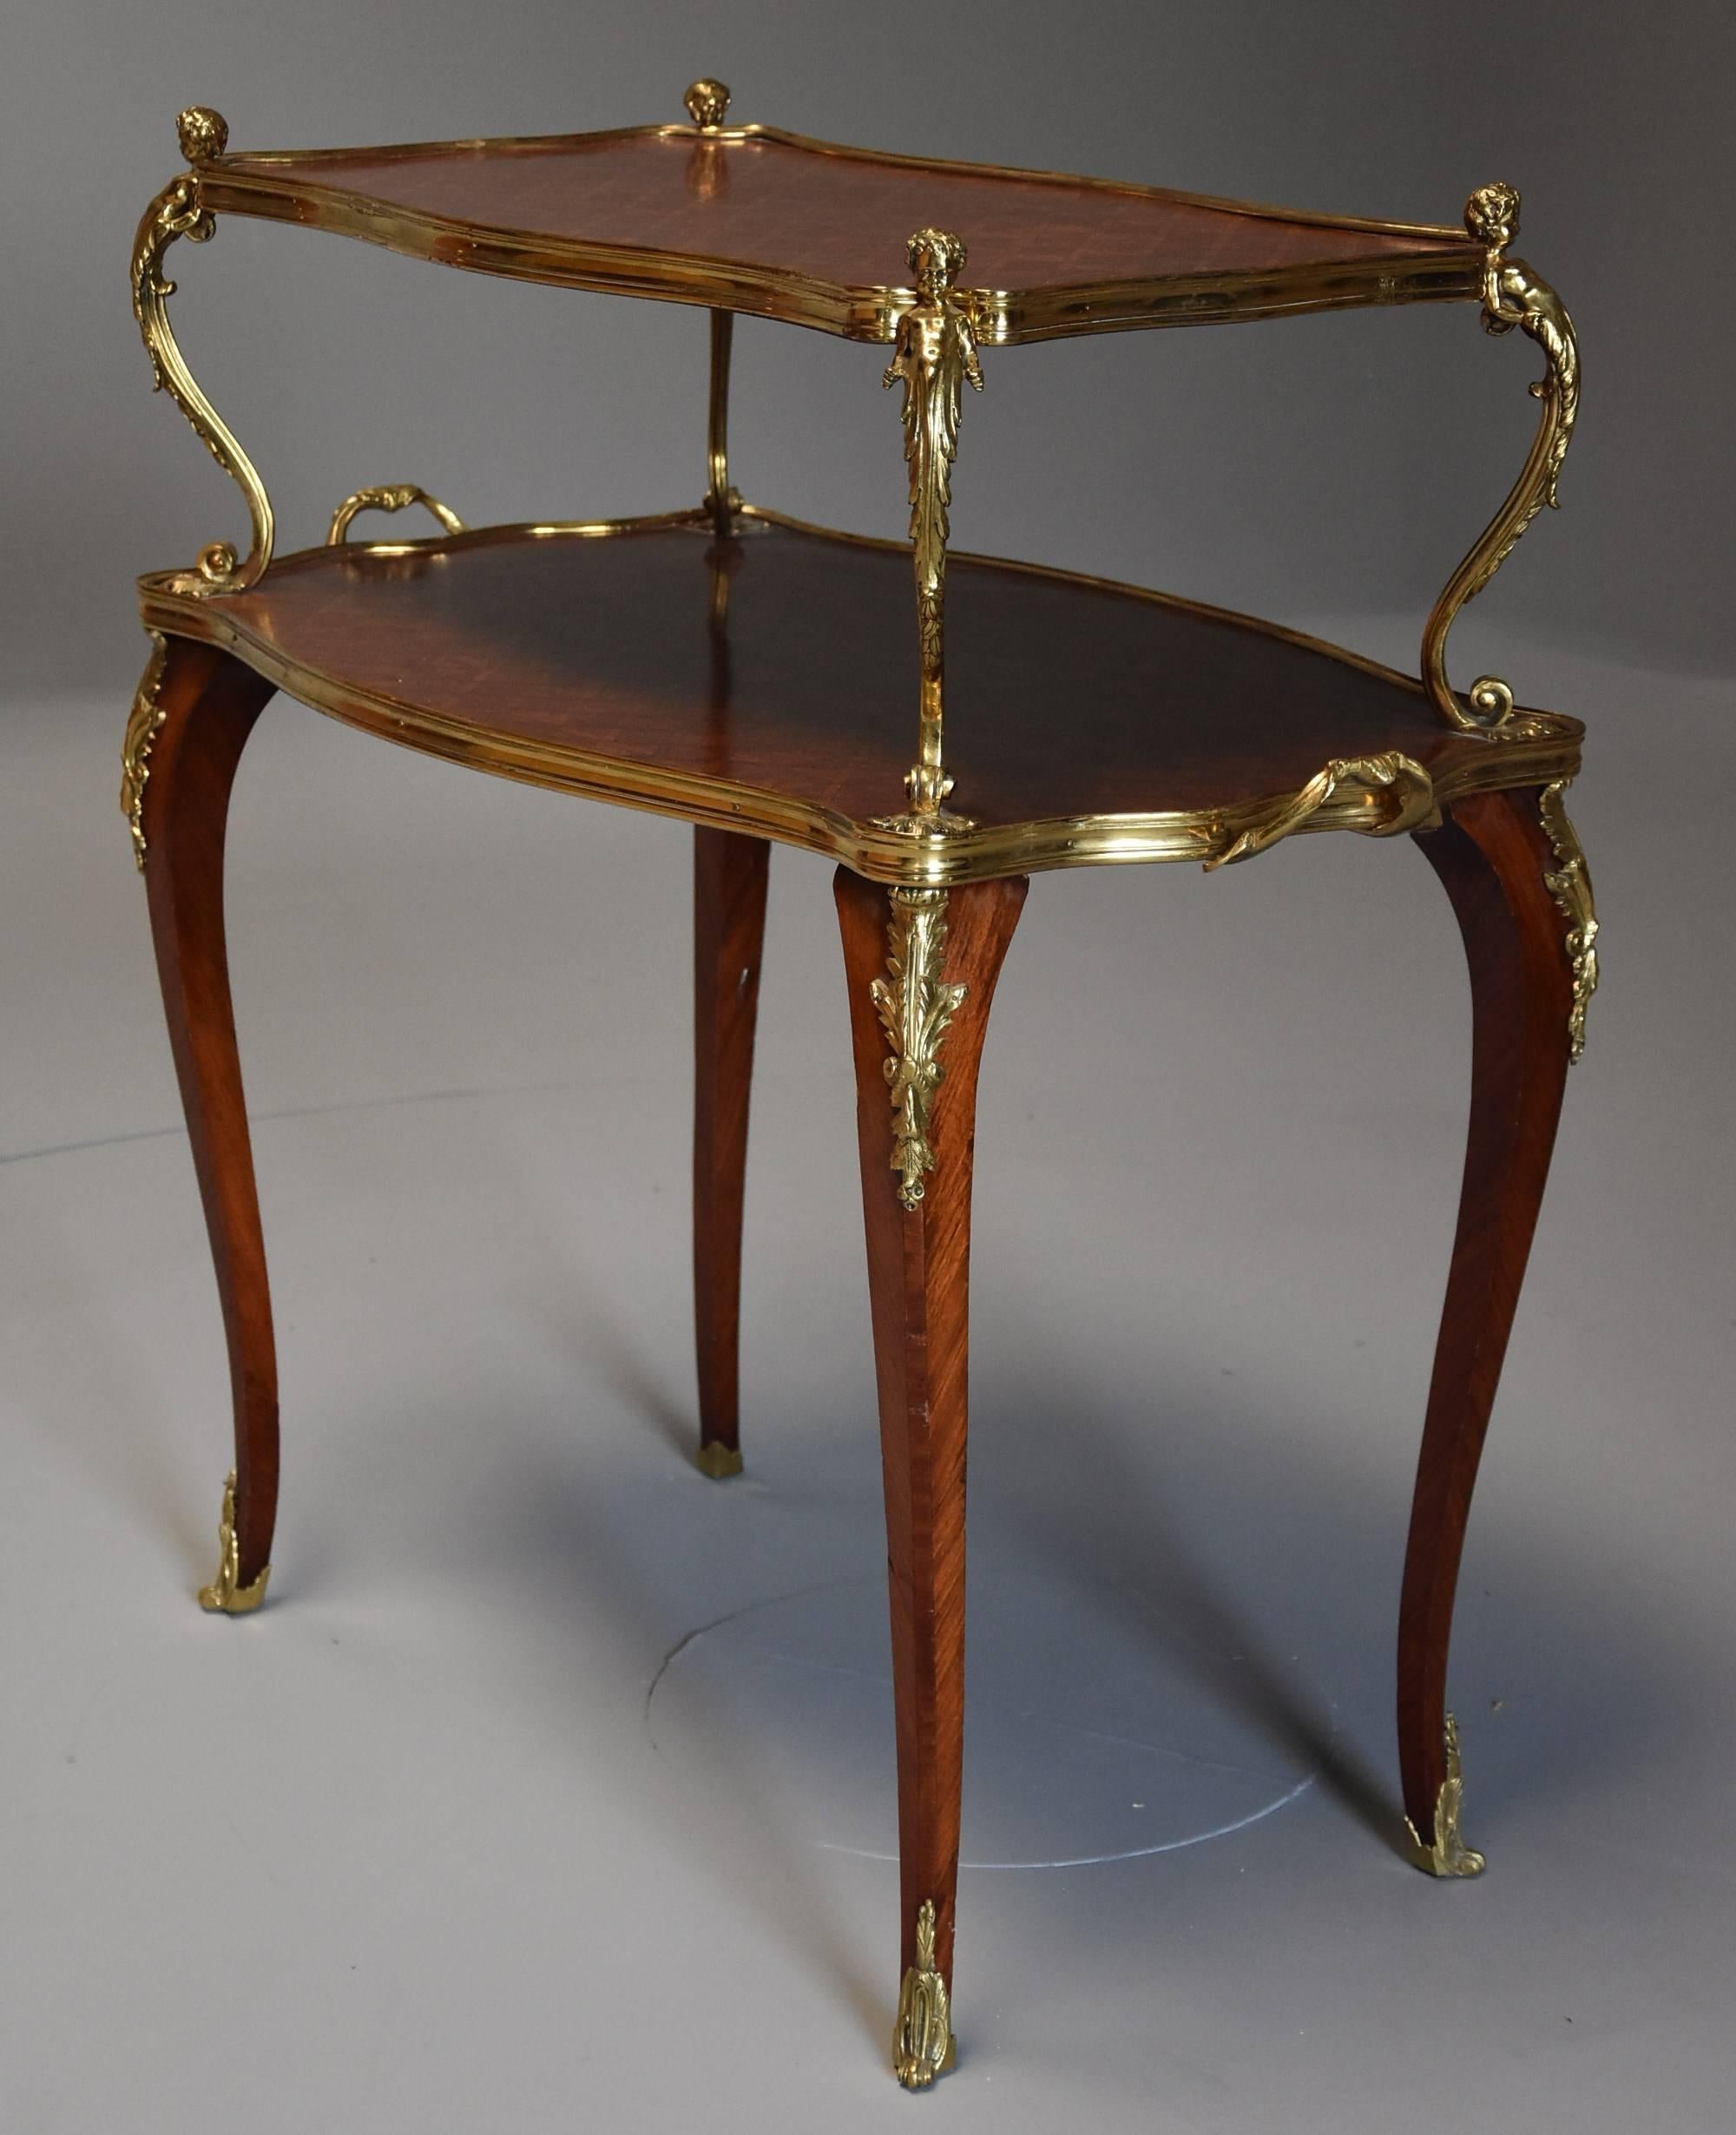 French 19th Century Kingwood Two-Tier Parquetry Serpentine Shaped Etagere For Sale 3